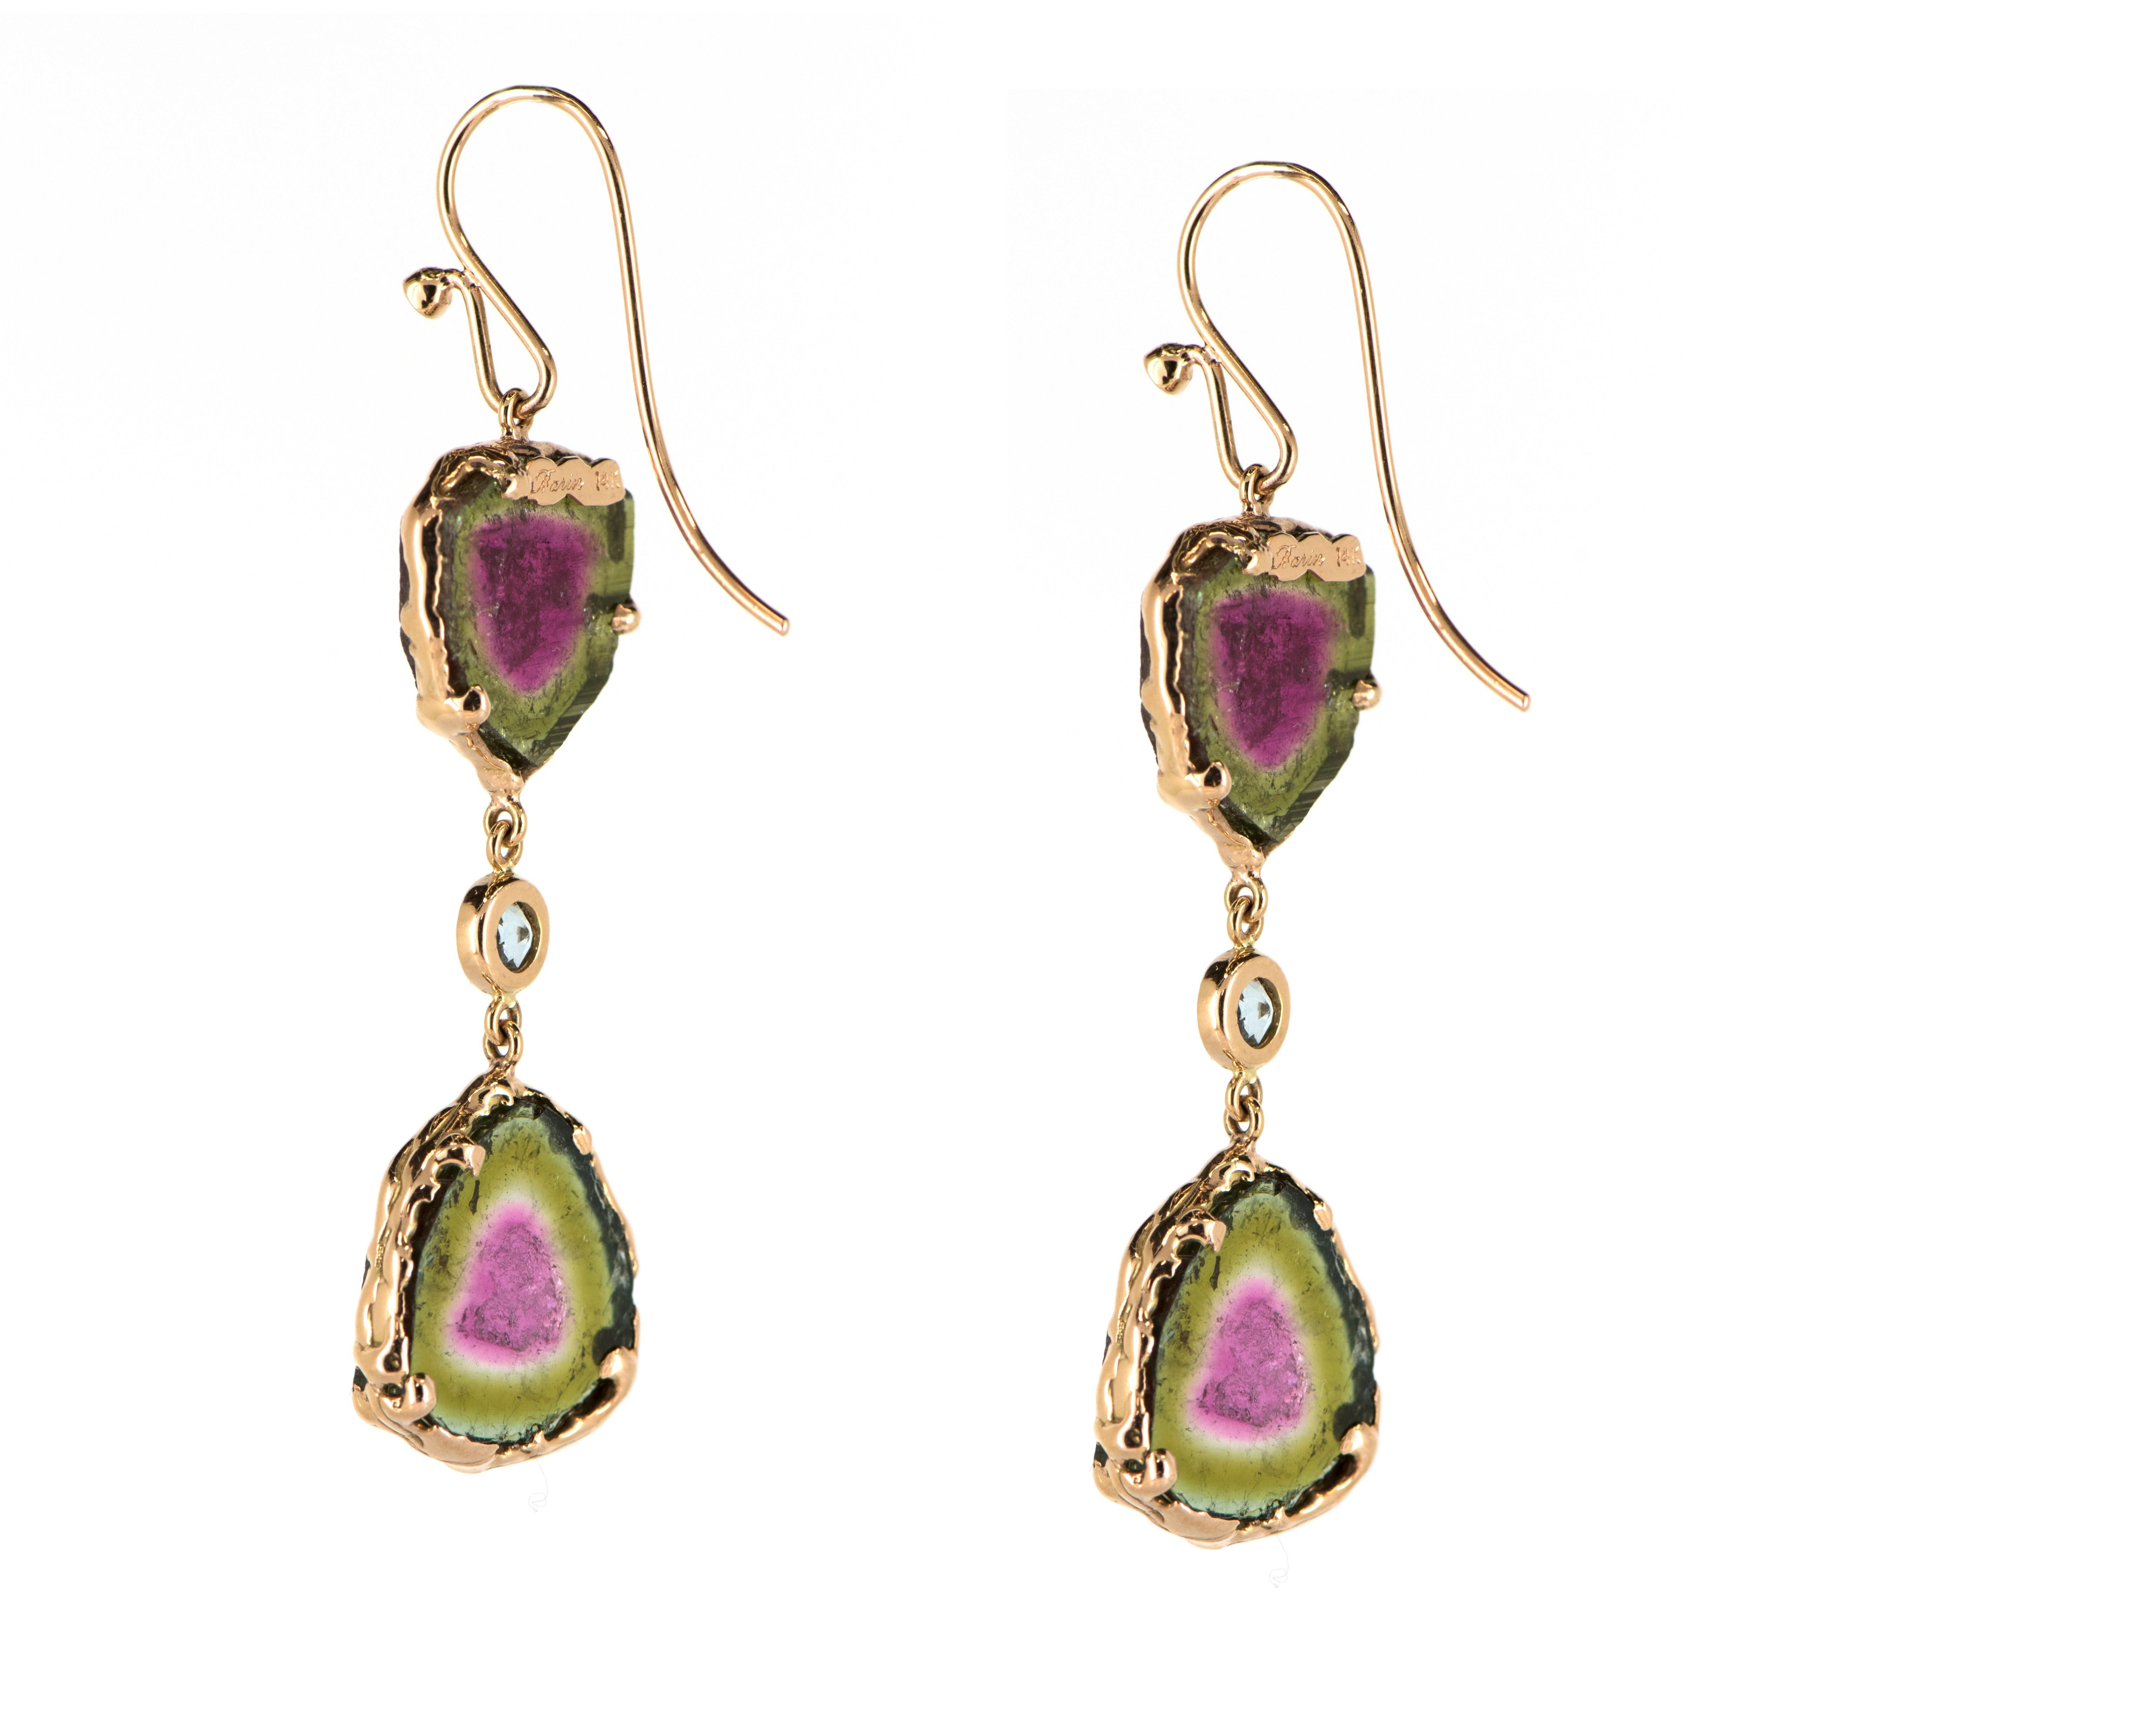 Introducing the stunning 14 Karat Rose Gold Watermelon Tourmaline Slice Dangle Earrings with Aquamarine accents. Named after its unique pink center framed in a green 